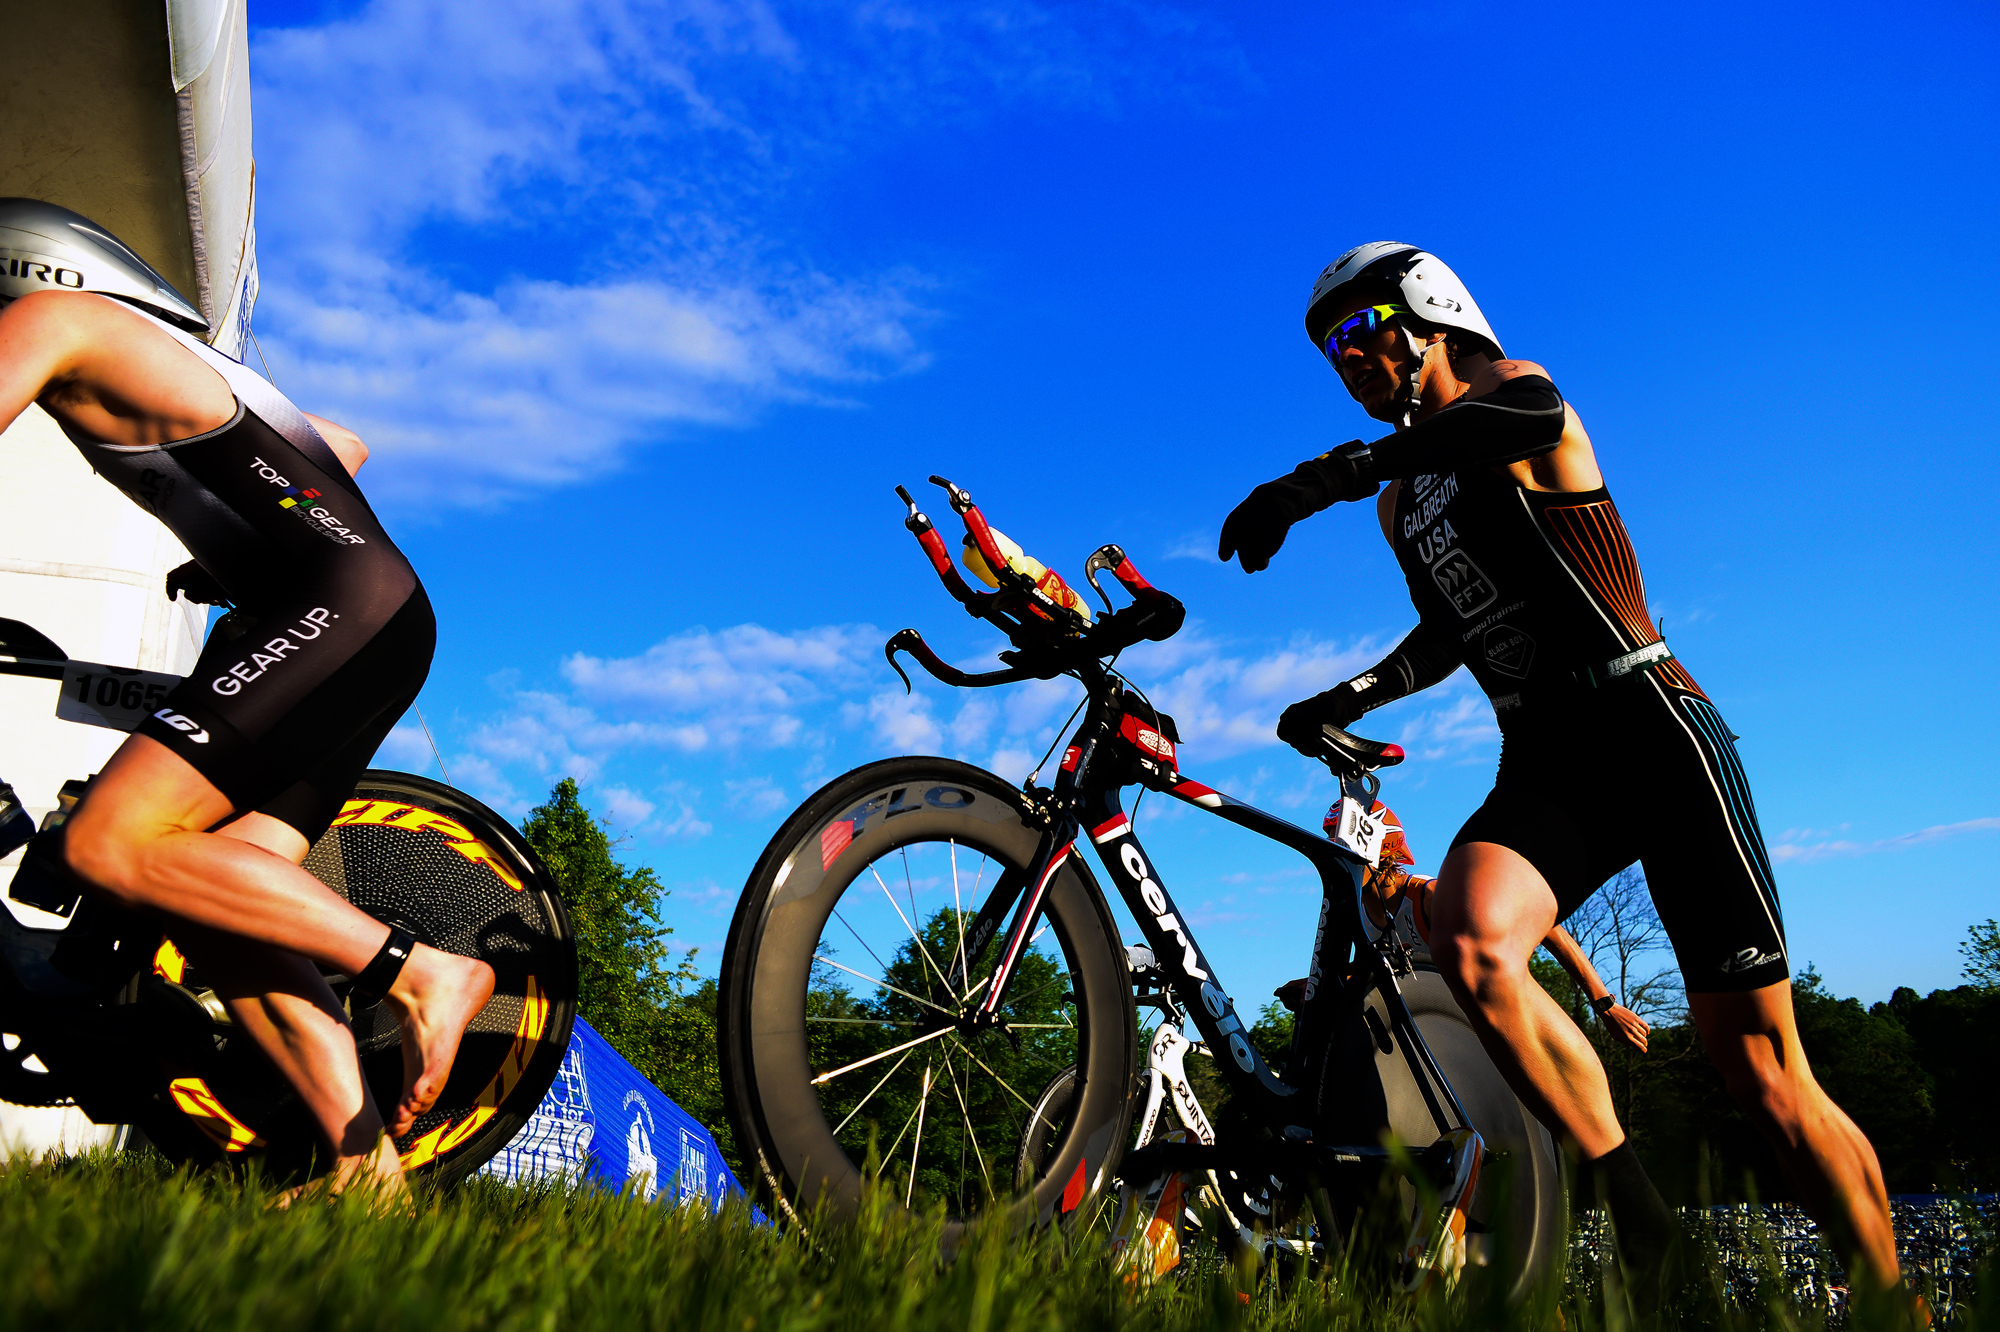  Justin Galbreath, right, of Coatesville, Pennsylvania races his bike up a hill&nbsp;during&nbsp;the 31st annual Columbia Triathlon at Centennial Park in Ellicott City, Maryland on&nbsp;May 18, 2014. 